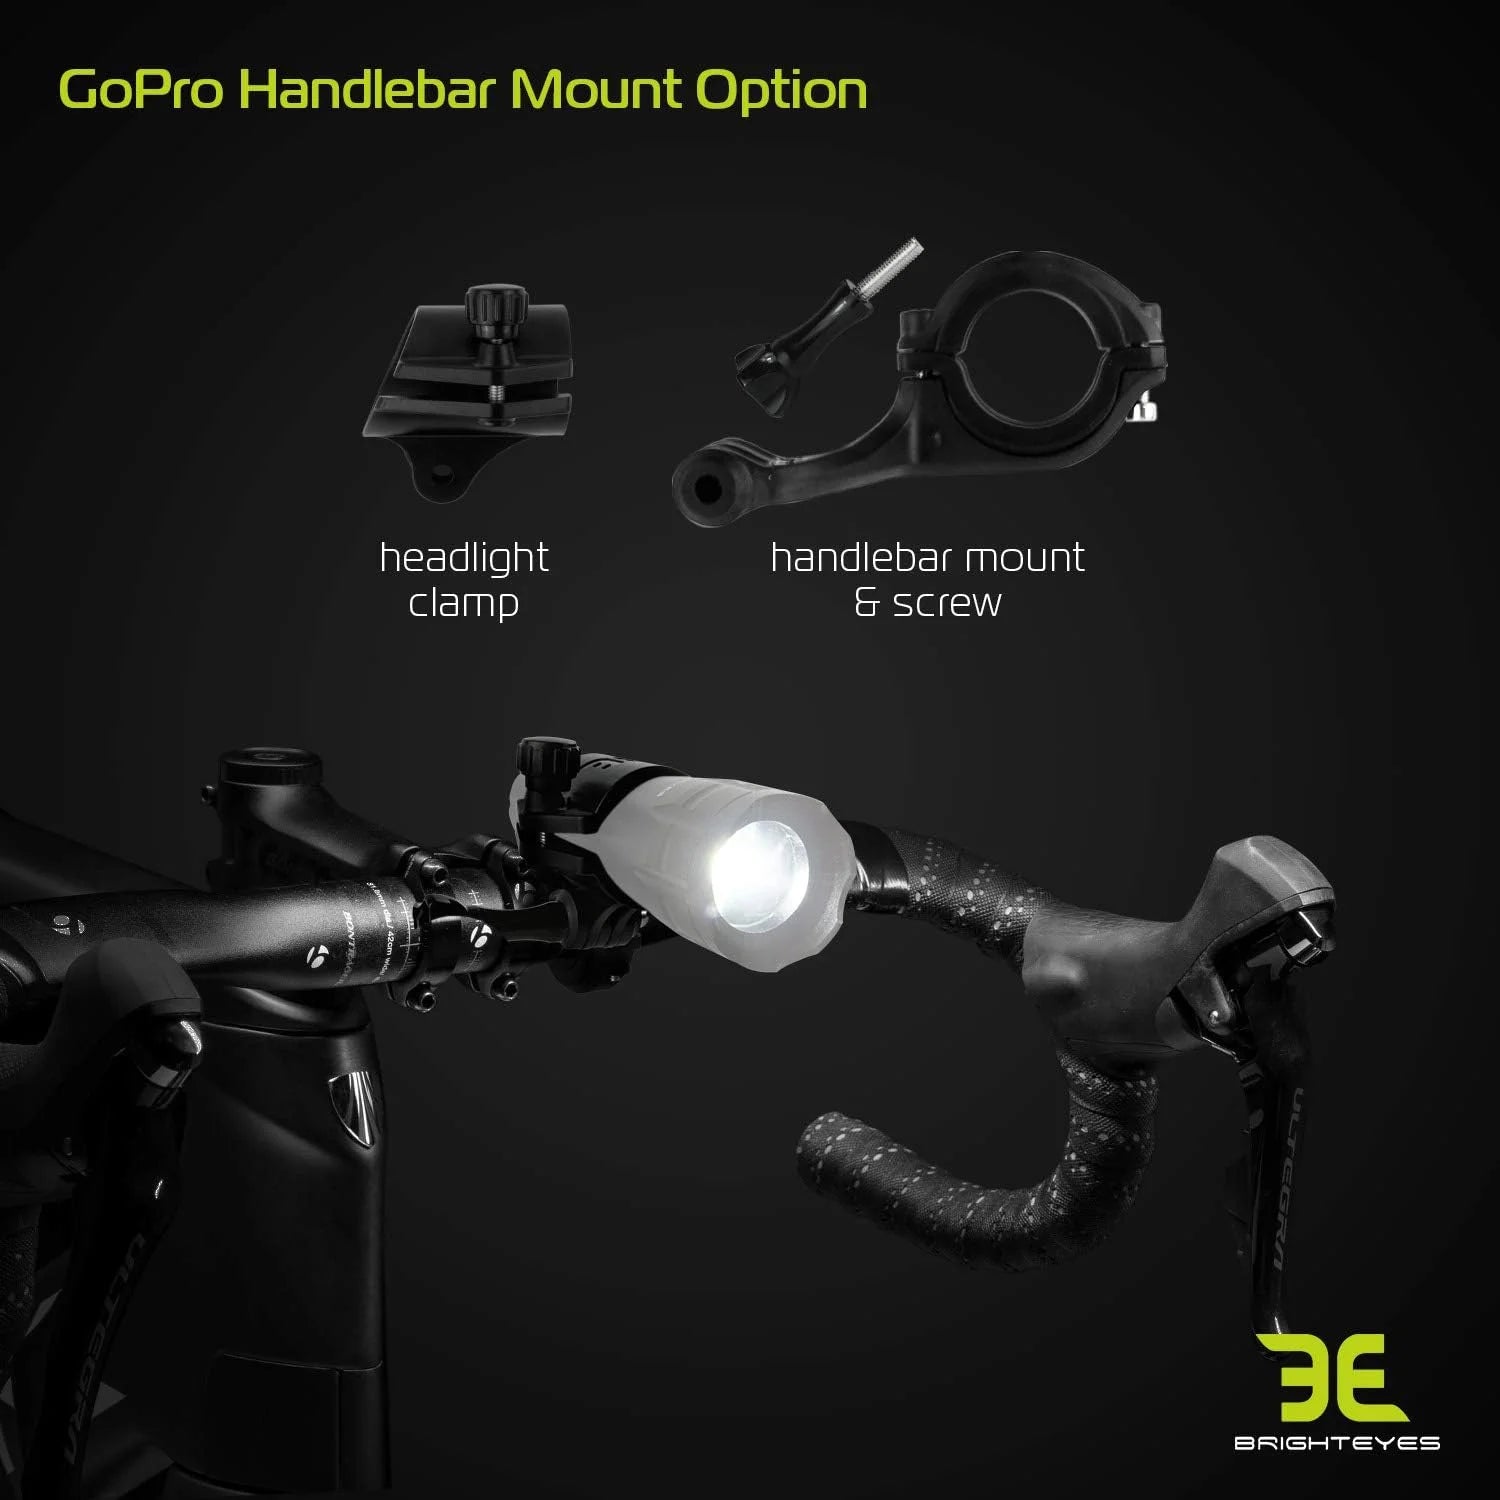 GoPro Mount for All Flashlight from 1 to 1-1/2" wide - Also for 300 Lumen Bike LIght Set